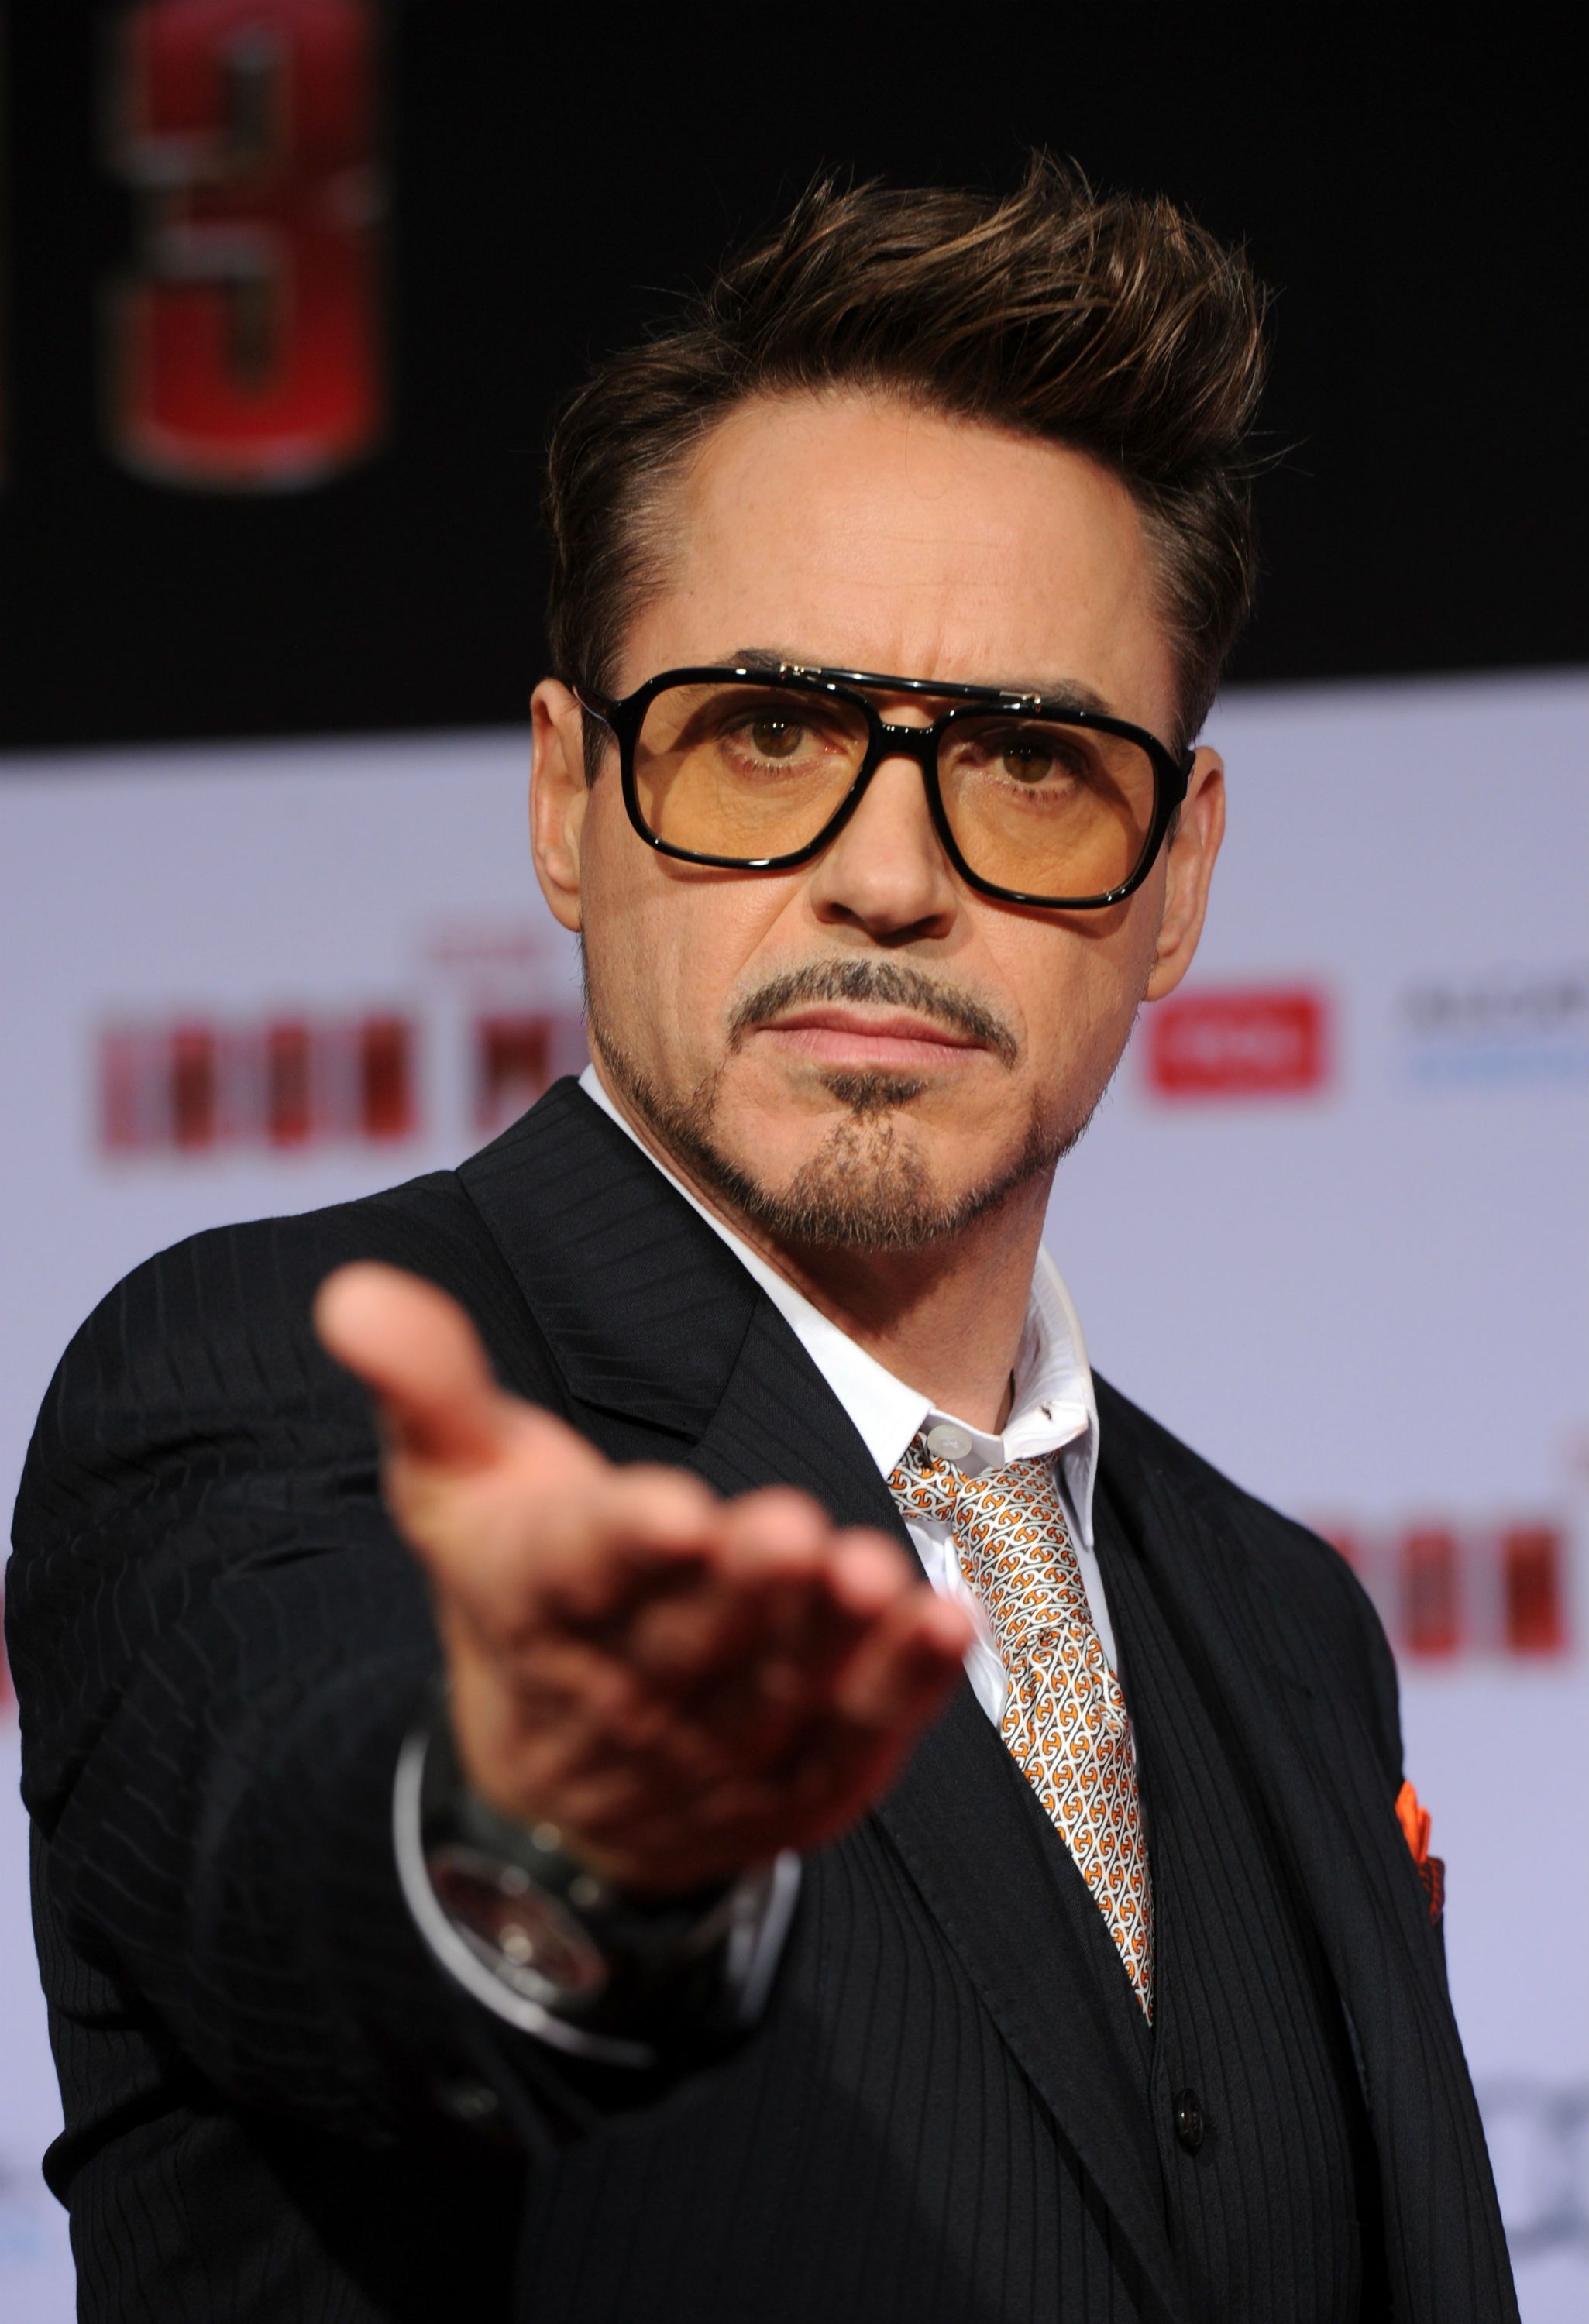 Robert Downey Jr: Taper Hairstyle With Small Quiff